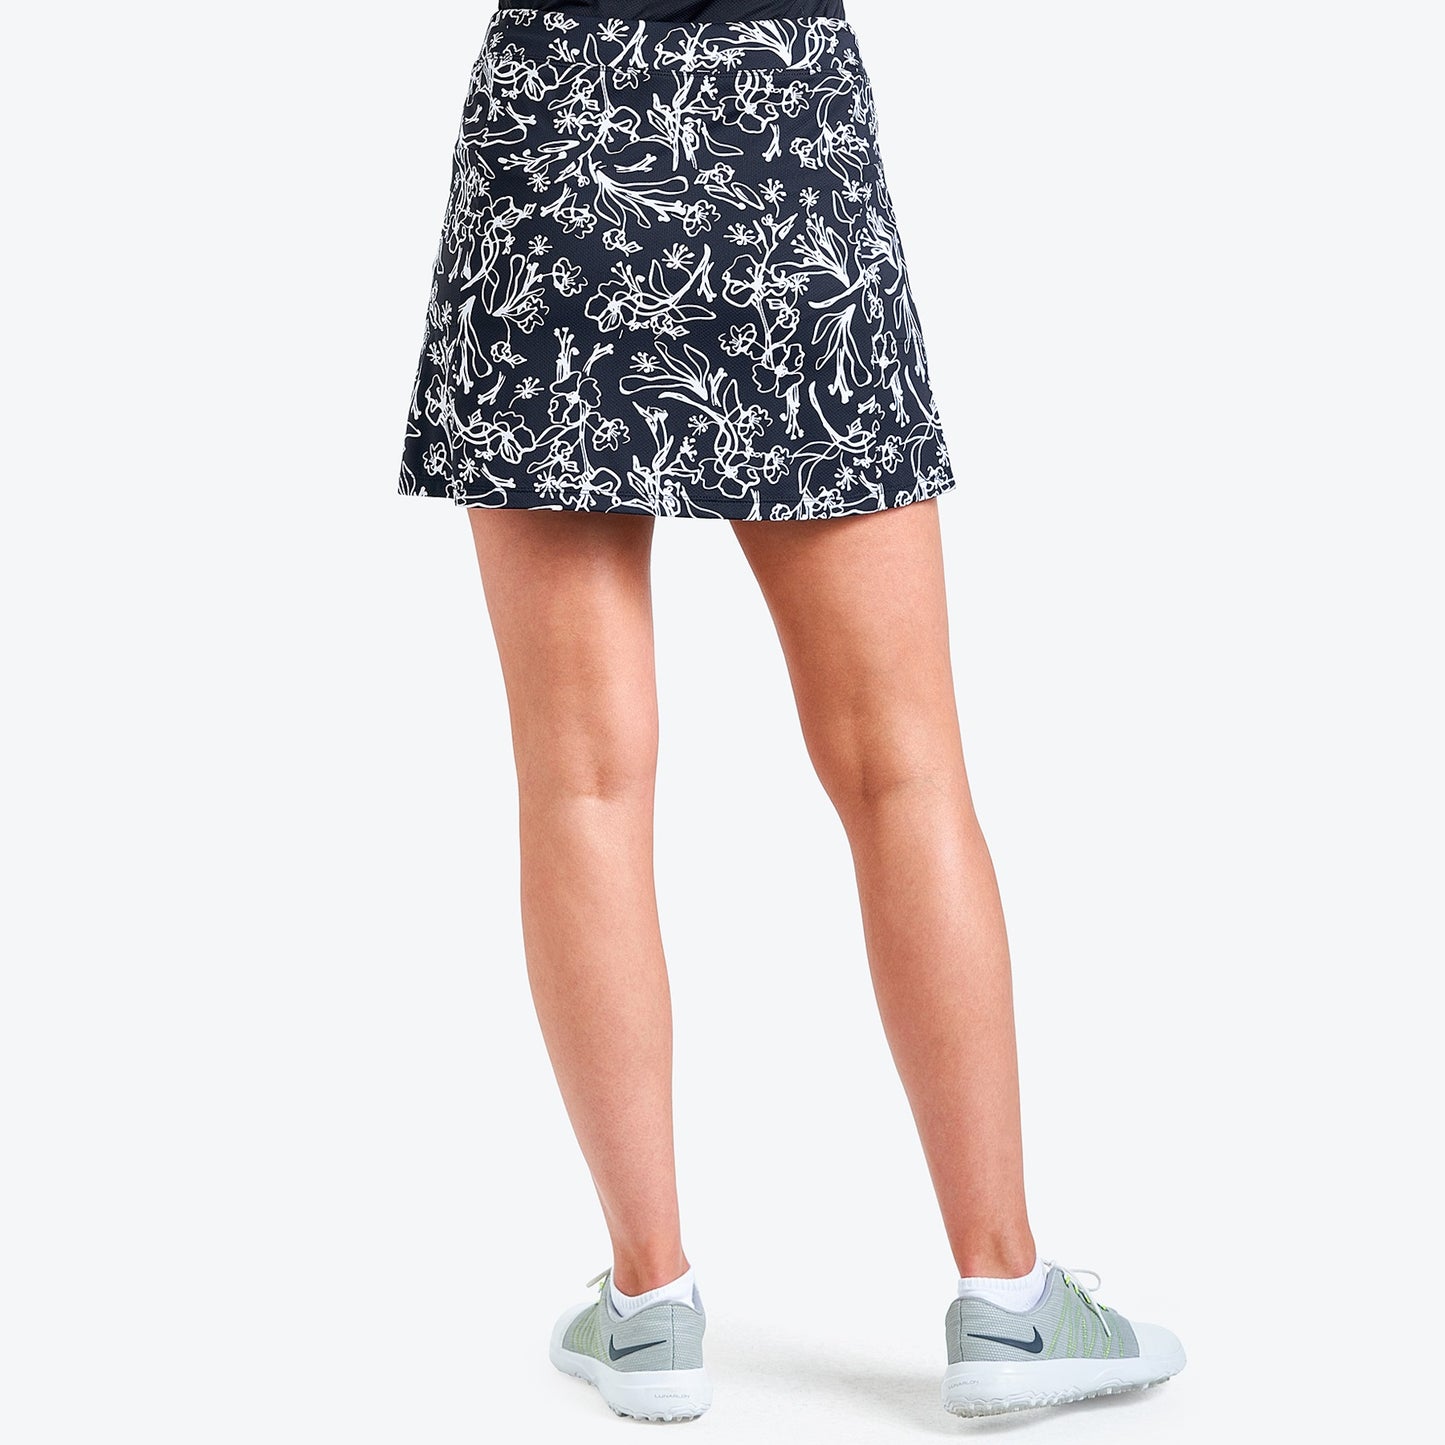 Nivo Layla Liv Cool Pull-On Skort in Black Print Rear Facing Product Image